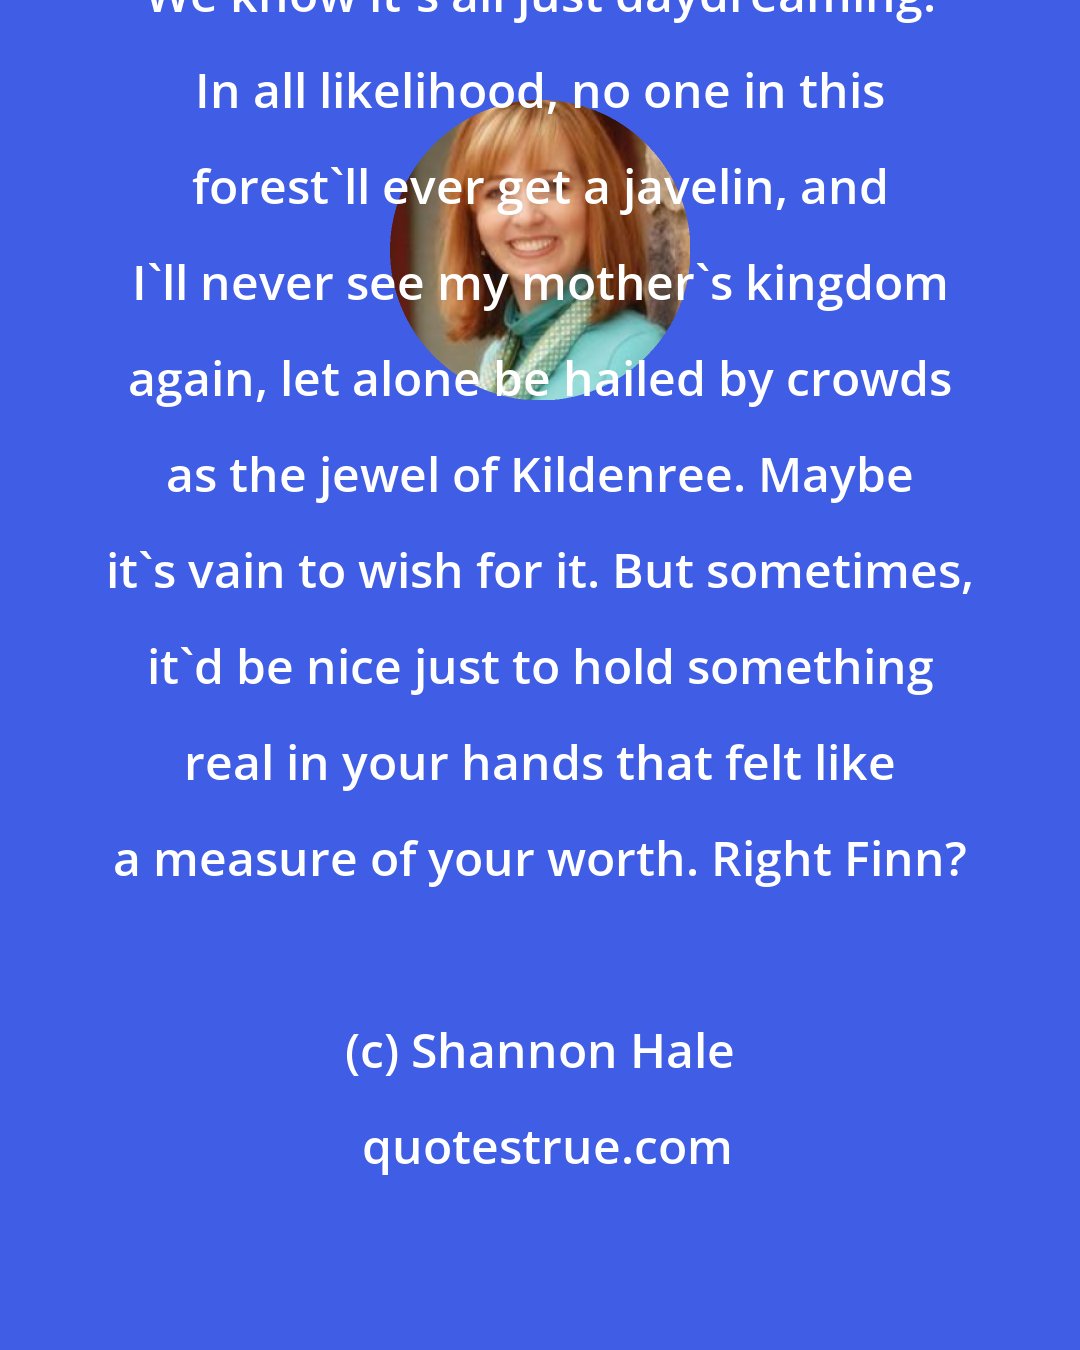 Shannon Hale: We know it's all just daydreaming. In all likelihood, no one in this forest'll ever get a javelin, and I'll never see my mother's kingdom again, let alone be hailed by crowds as the jewel of Kildenree. Maybe it's vain to wish for it. But sometimes, it'd be nice just to hold something real in your hands that felt like a measure of your worth. Right Finn?